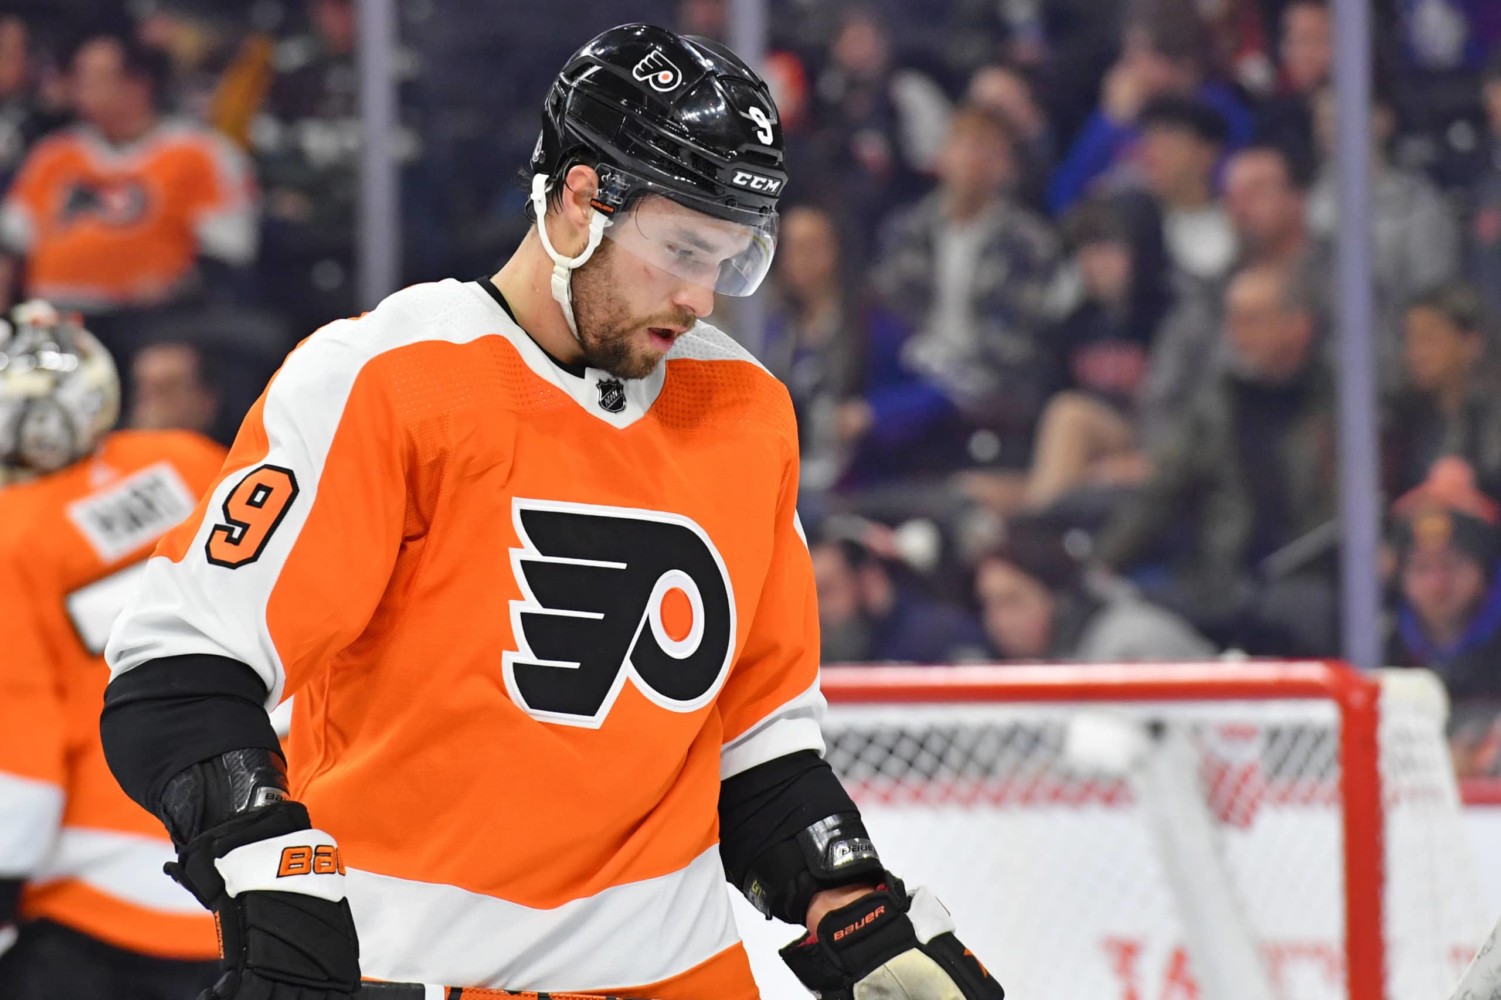 Flyers player's boycott of NHL pride event has media up in arms